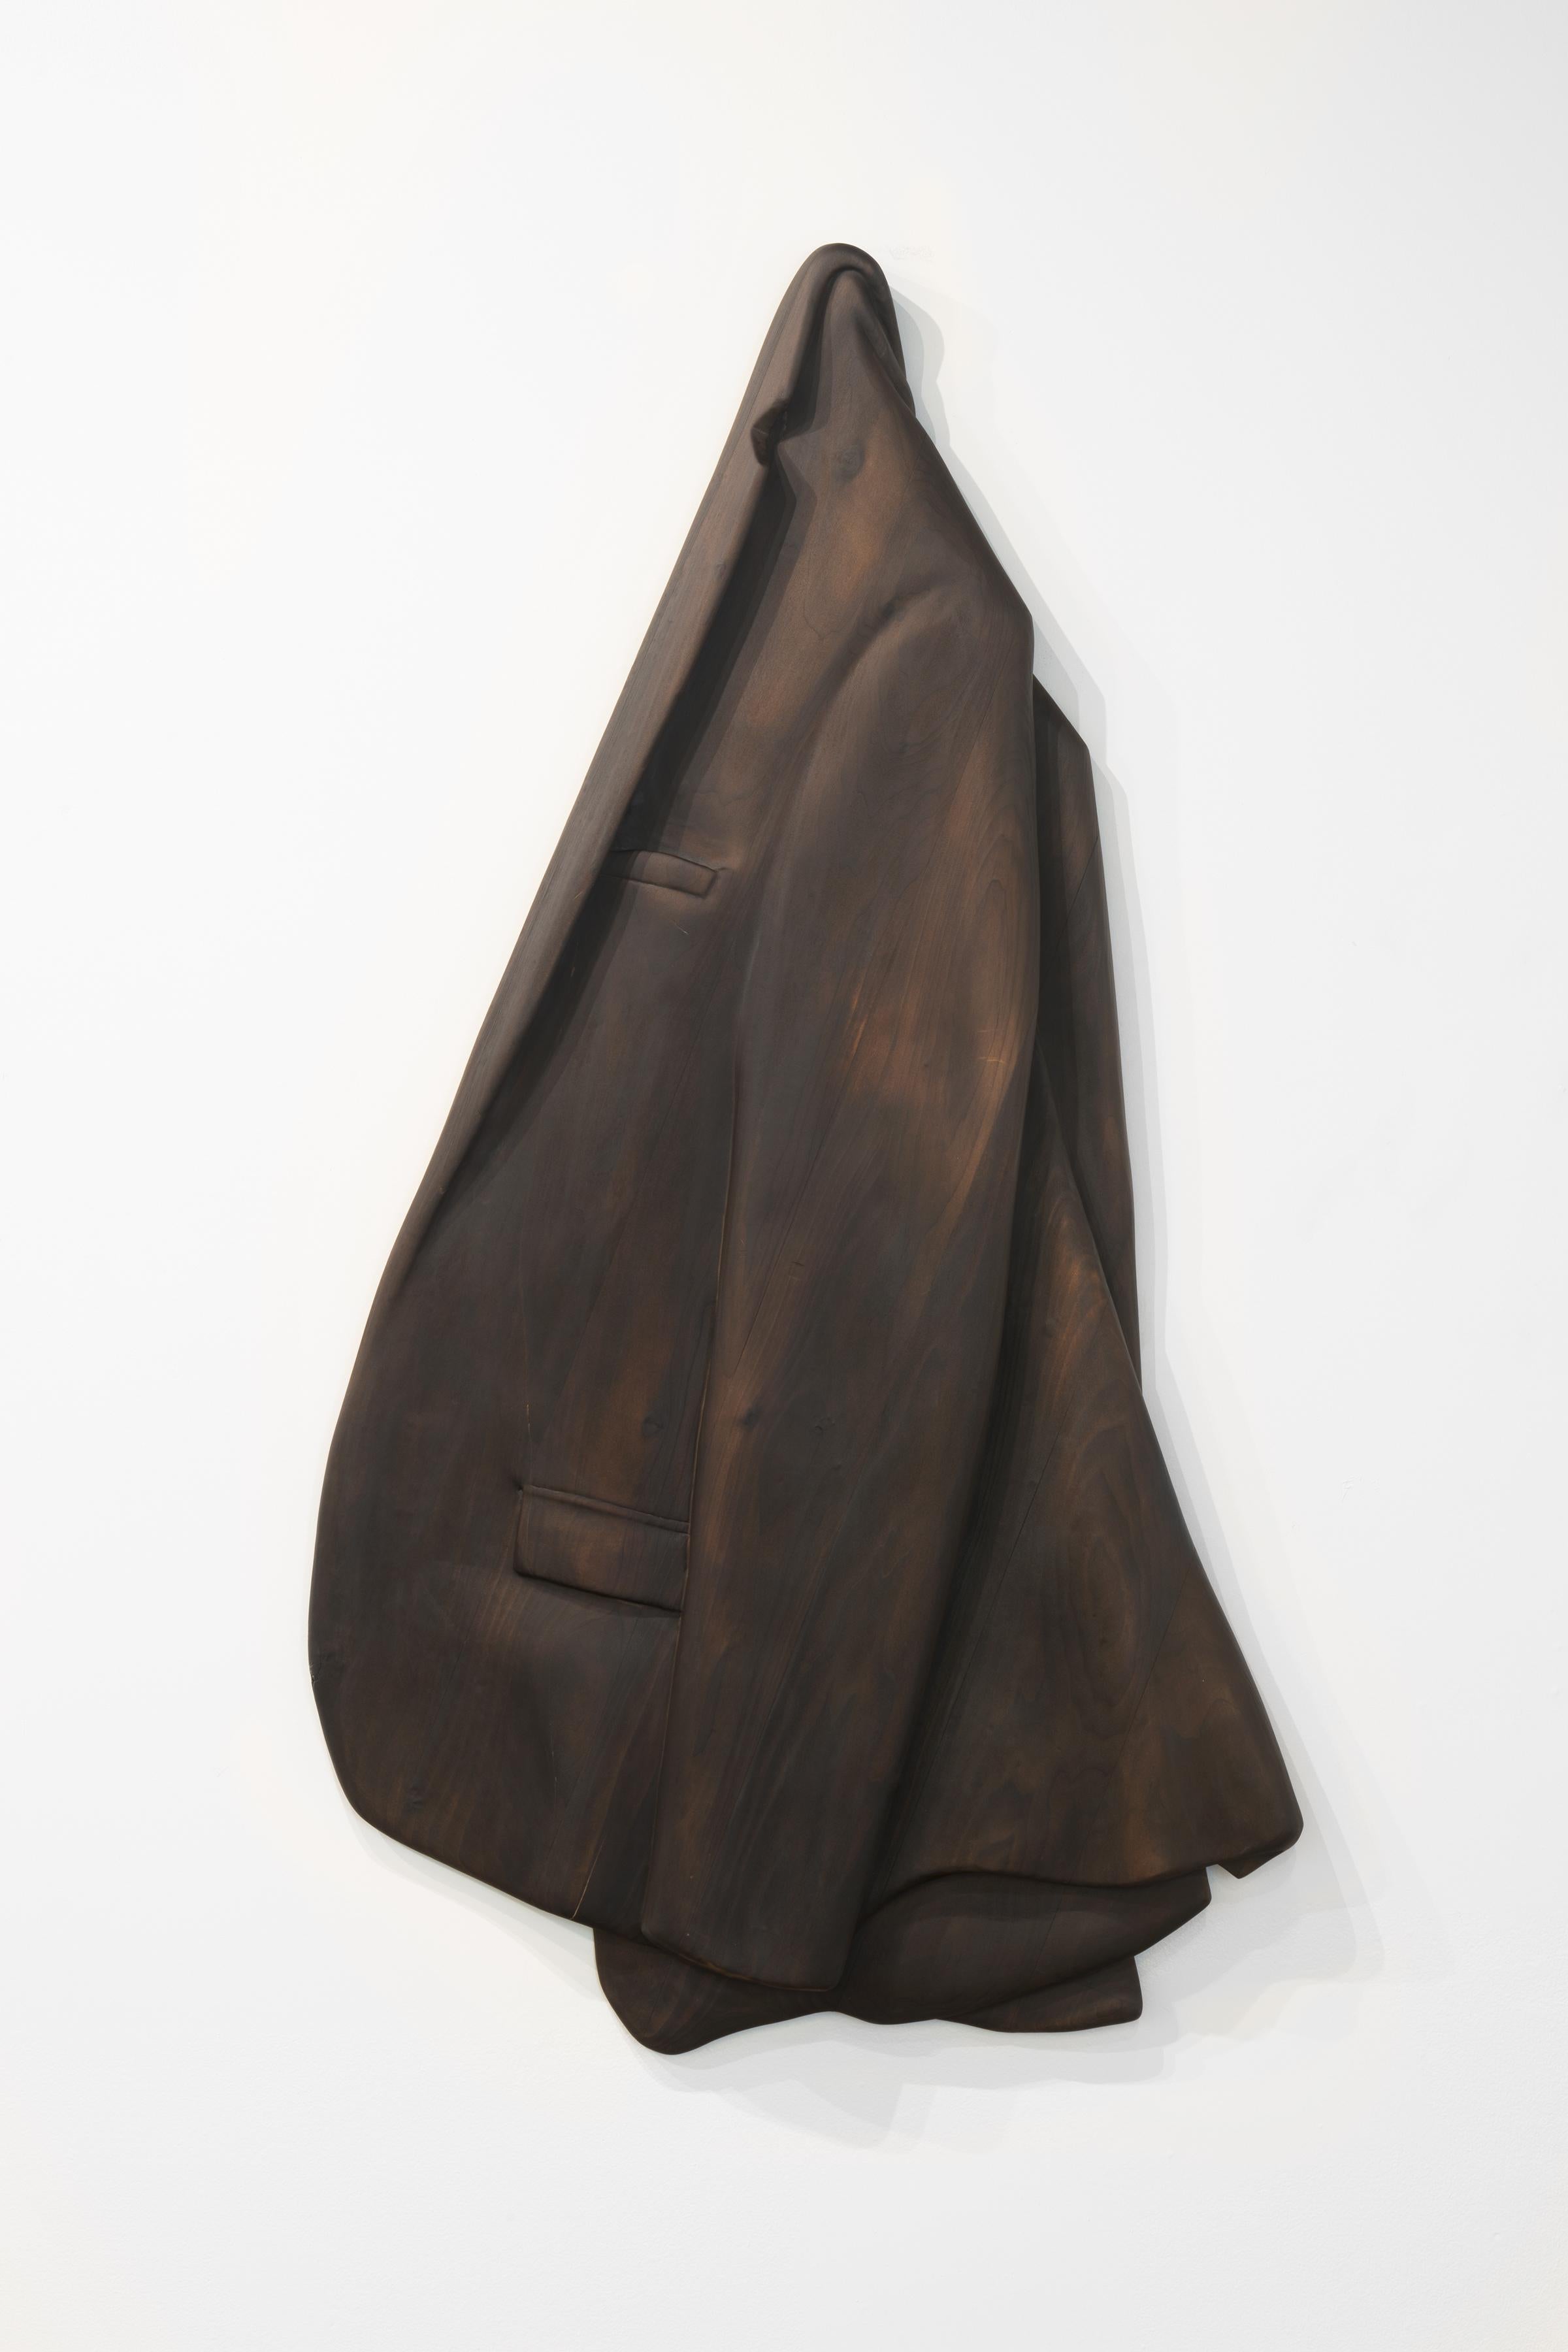 Ray Padron Figurative Sculpture - SUIT JACKET - stained wooden hanging sculpture, brown, carved wood